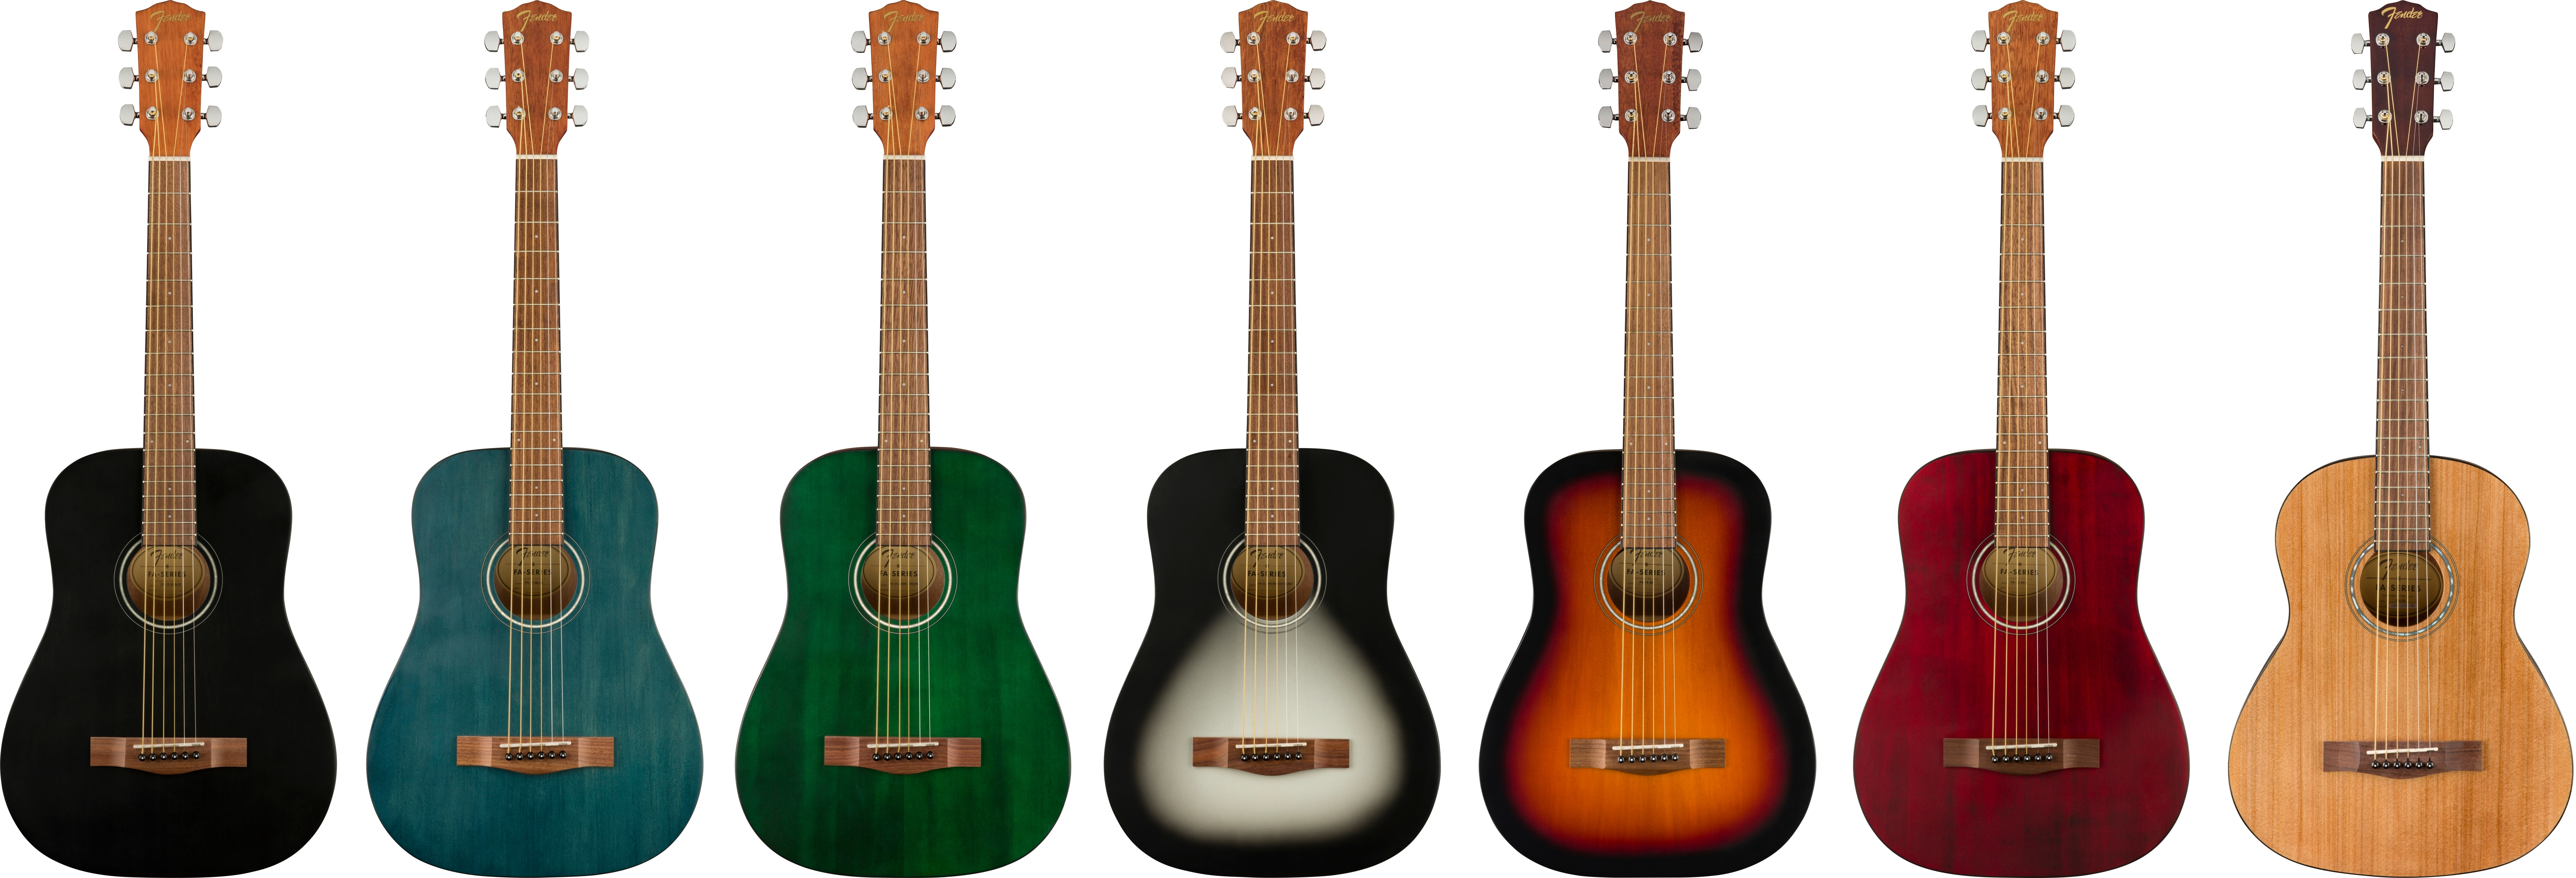 Fender FA-15 colors available